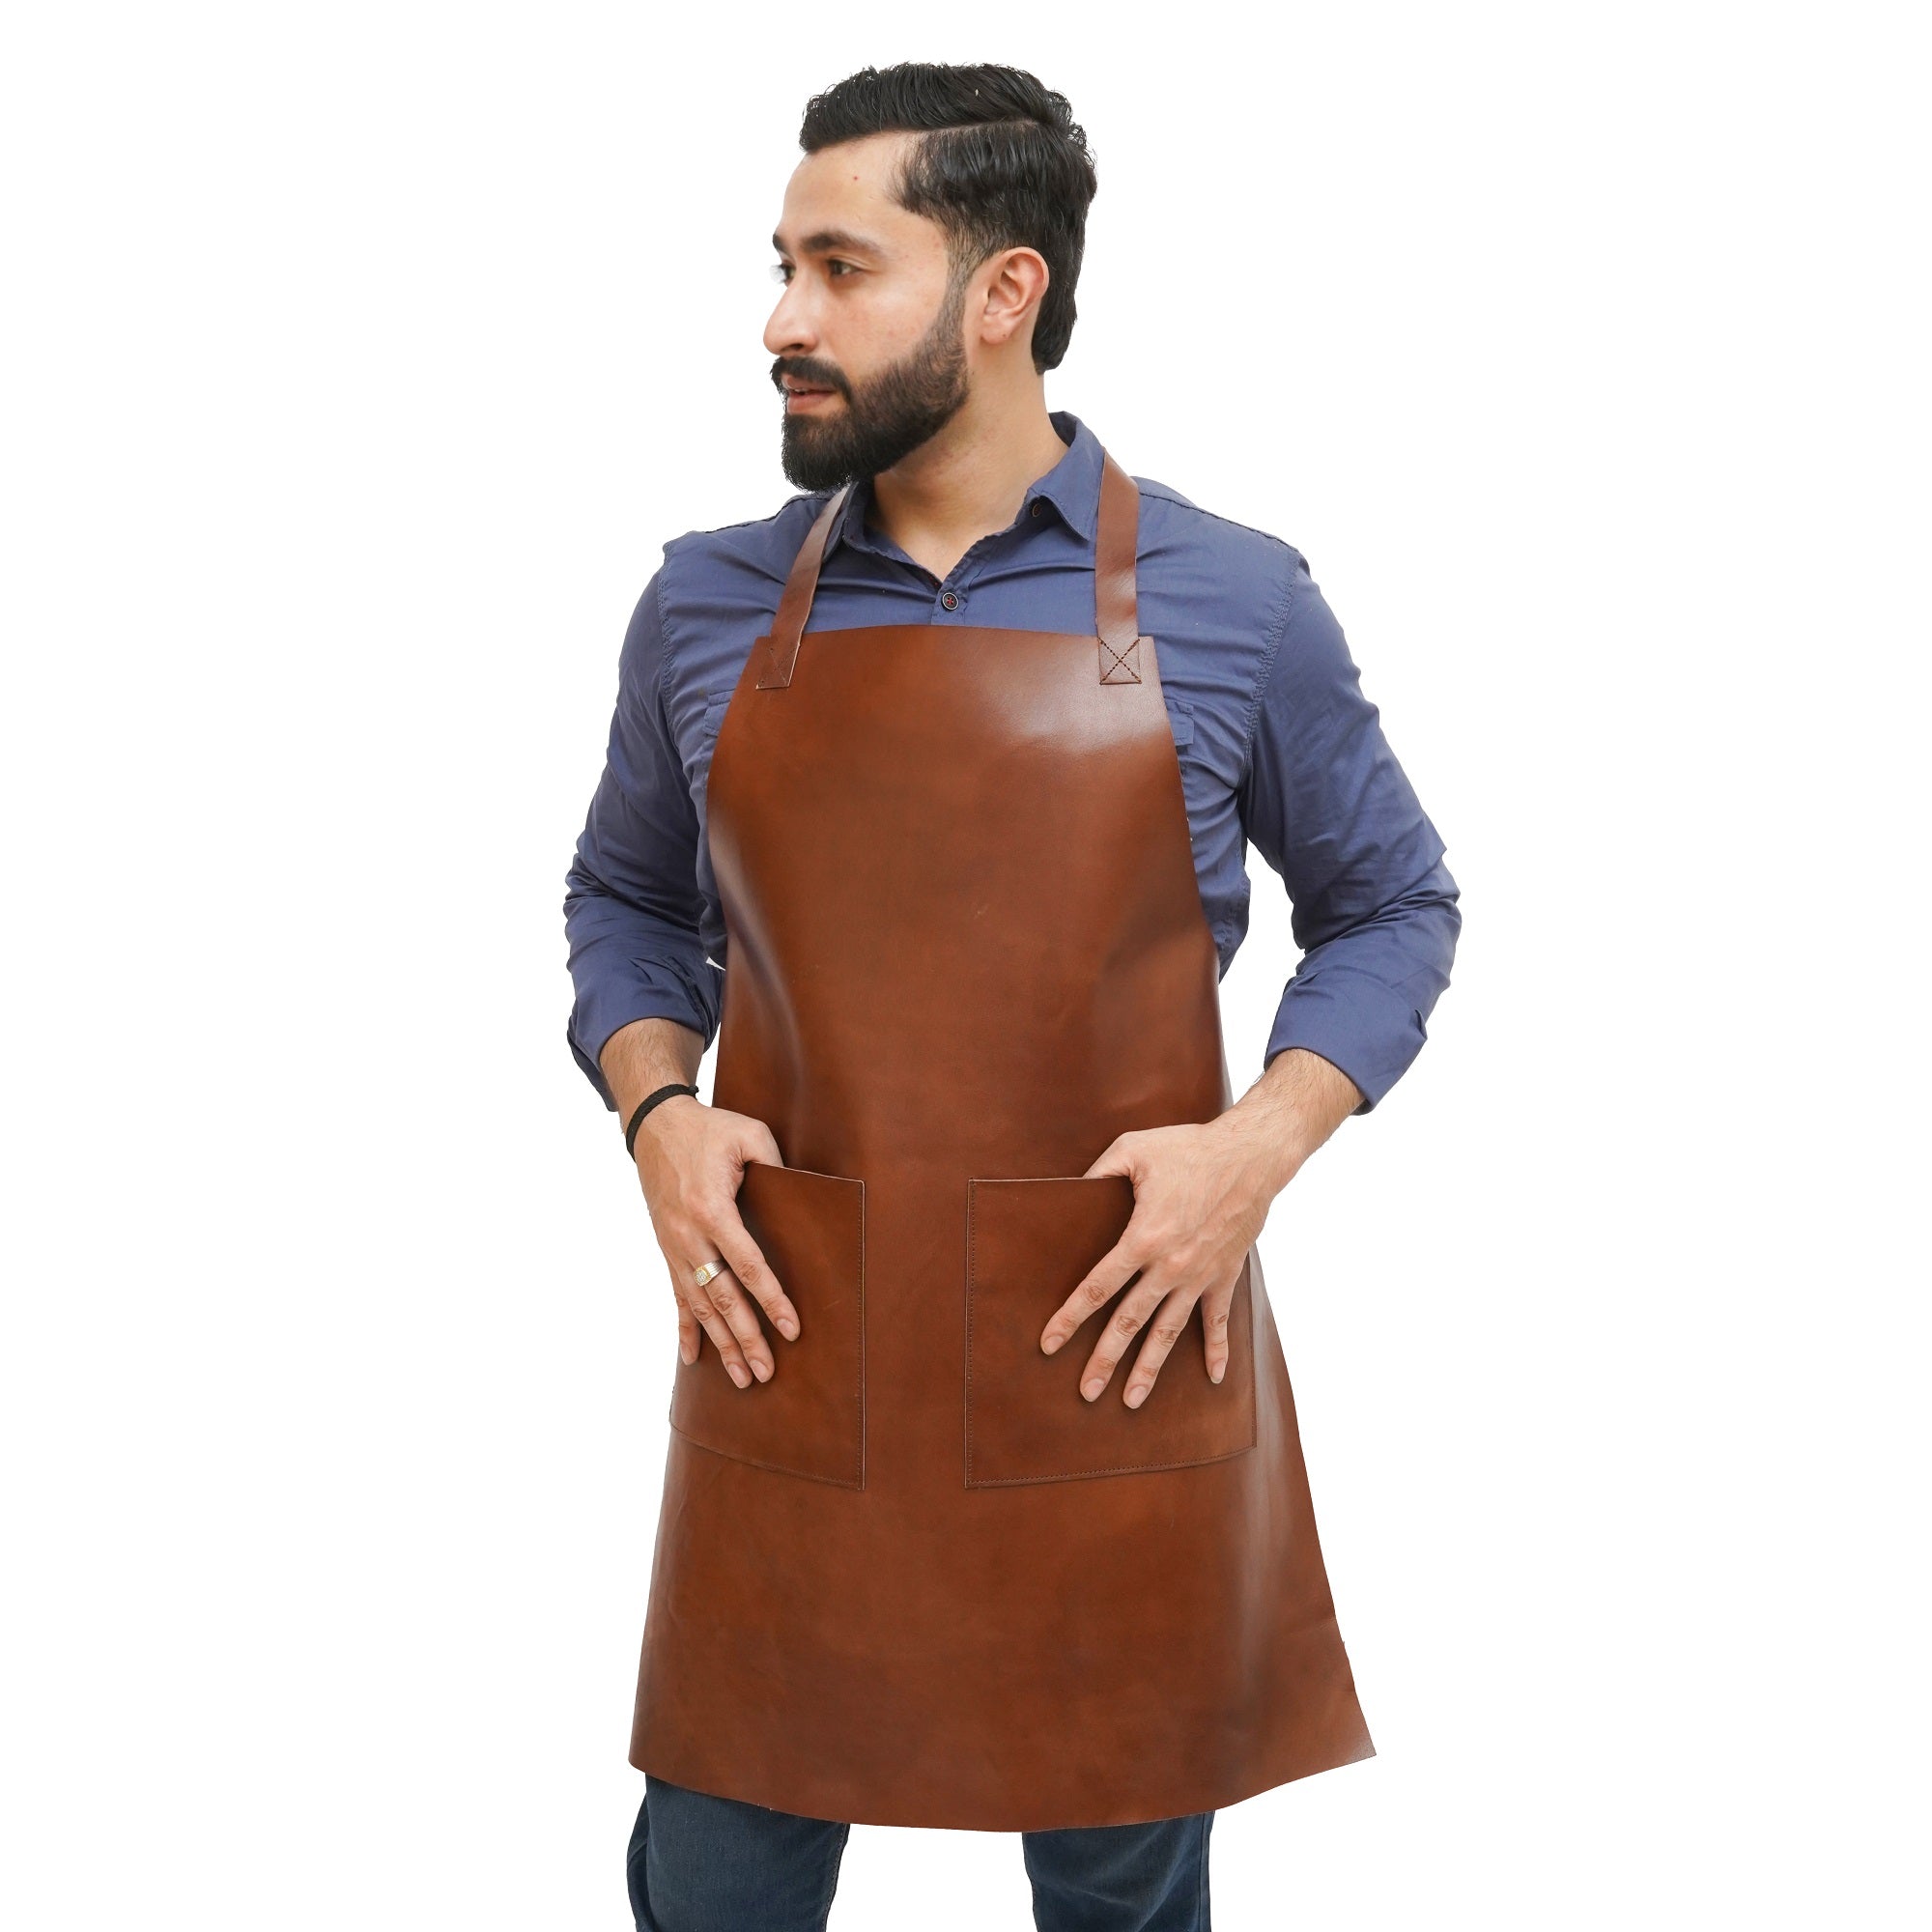 Leather Aprons, Leather Woodworking Apron, Leather Butcher Apron, Leather Chef Apron, Leather Blacksmith Apron, Leather Barber Apron, Leather BBQ Apron, Leather Carpenters Apron, Leather Welding Apron, Handmade Leather Apron